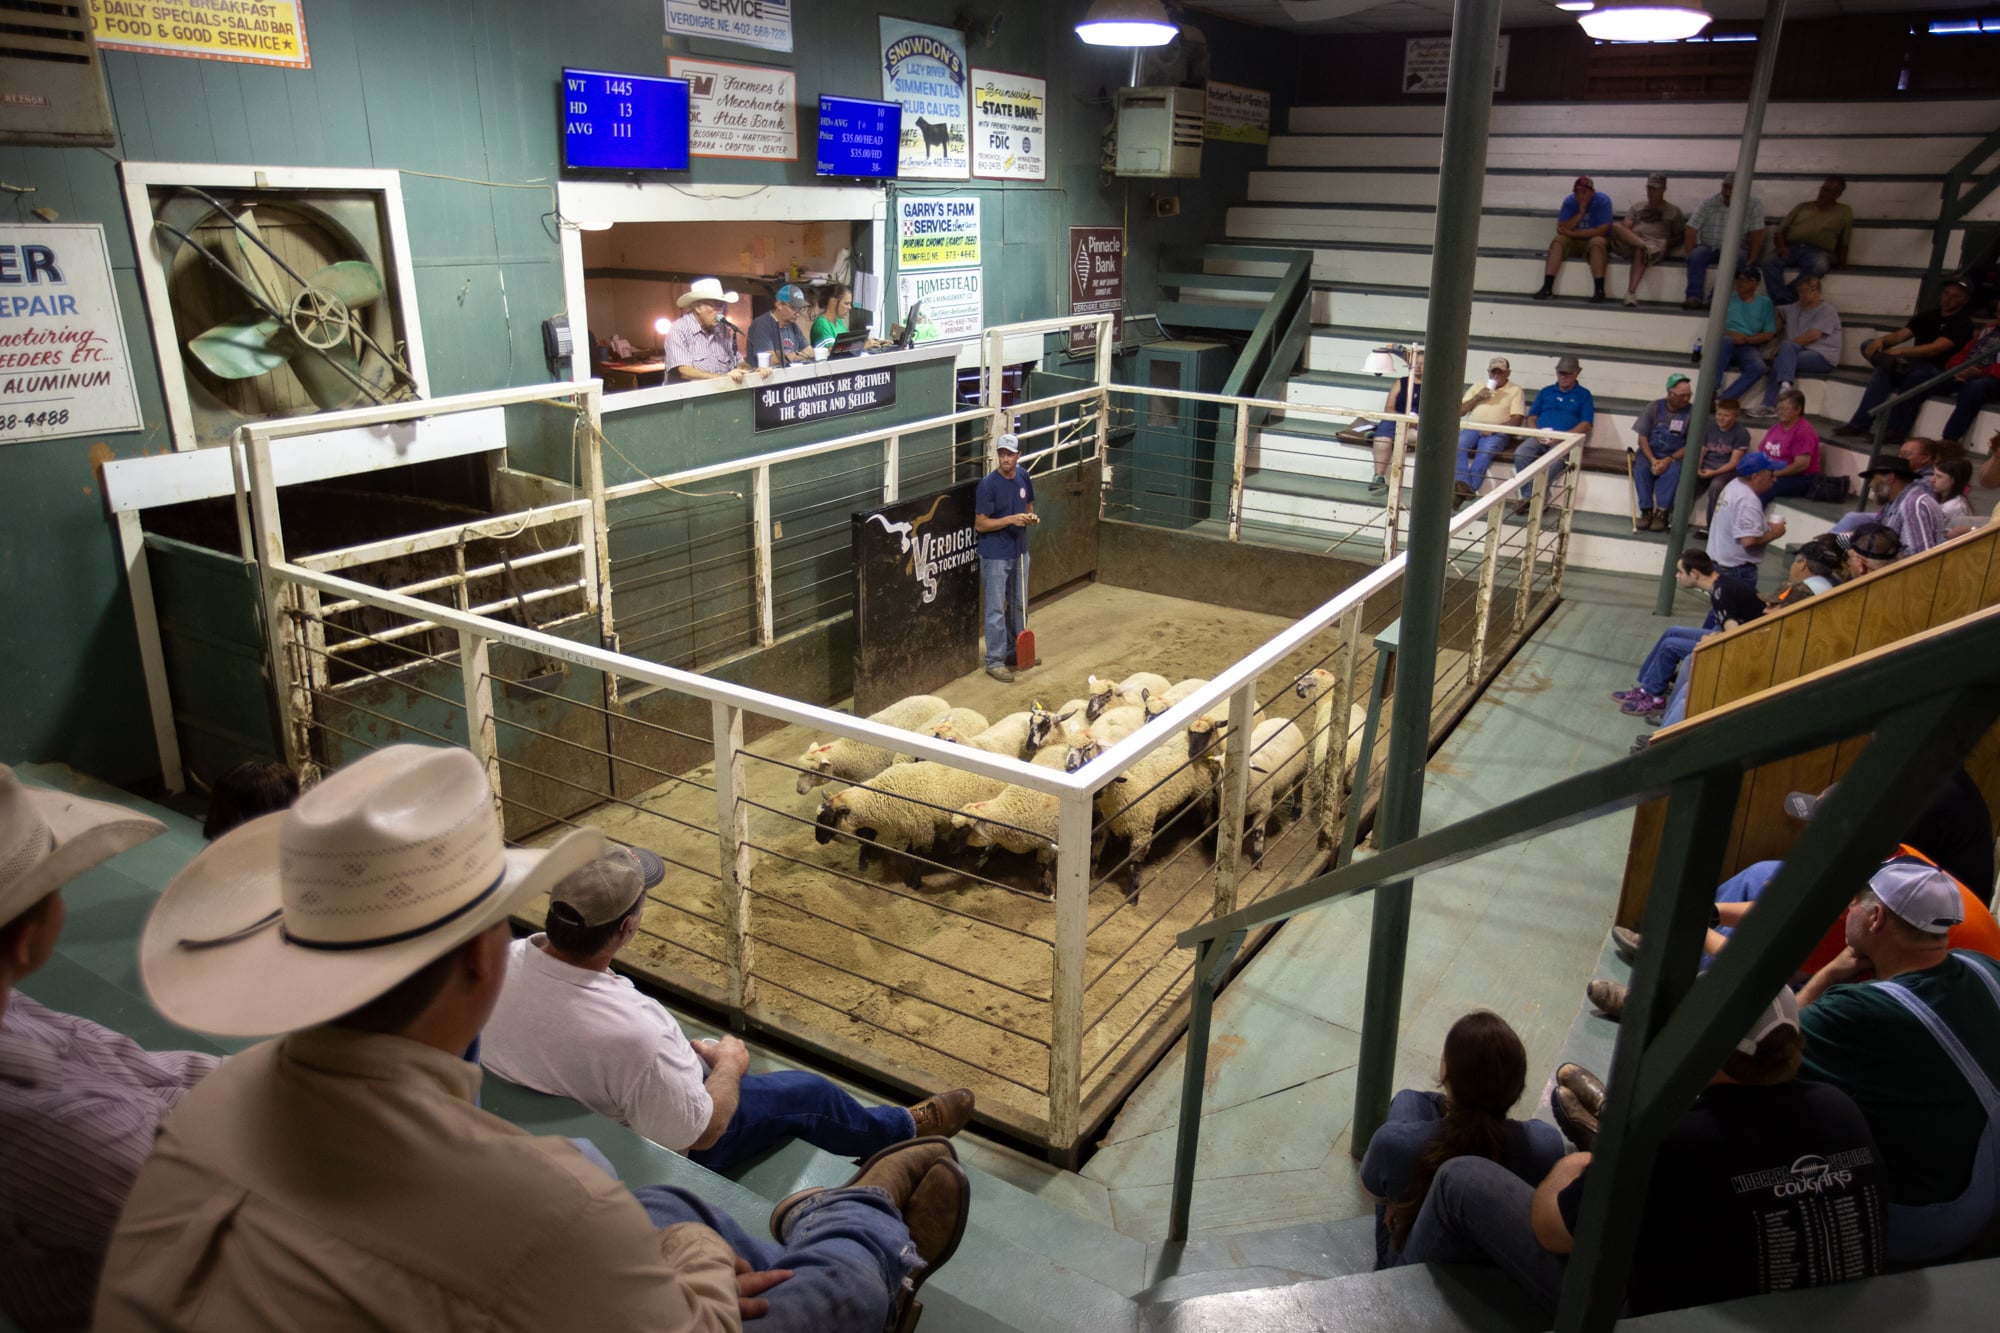 Sheep are auctioned at the stockyards in Verdigre, a farming and ranching town of about 600 in northeastern Nebraska. (Anya Magnuson/News21)